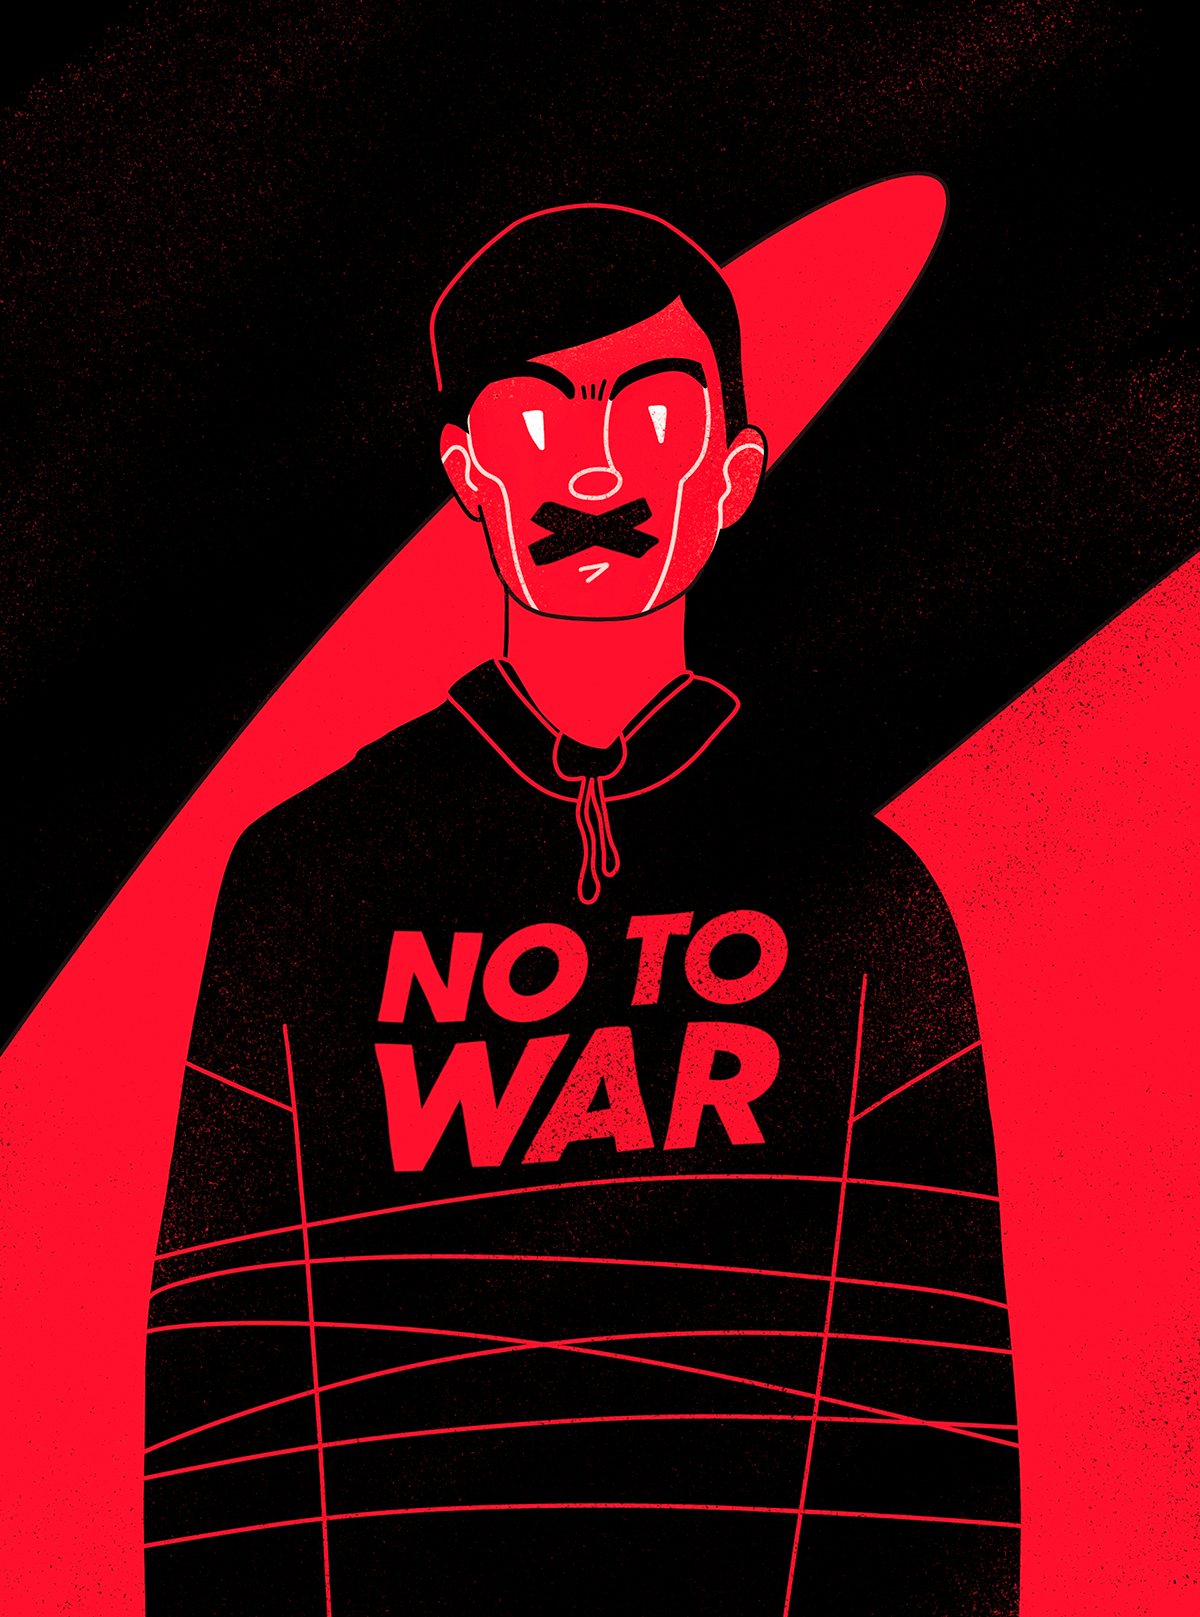 Flat illustration of a character protesting against the war, while being silenced.